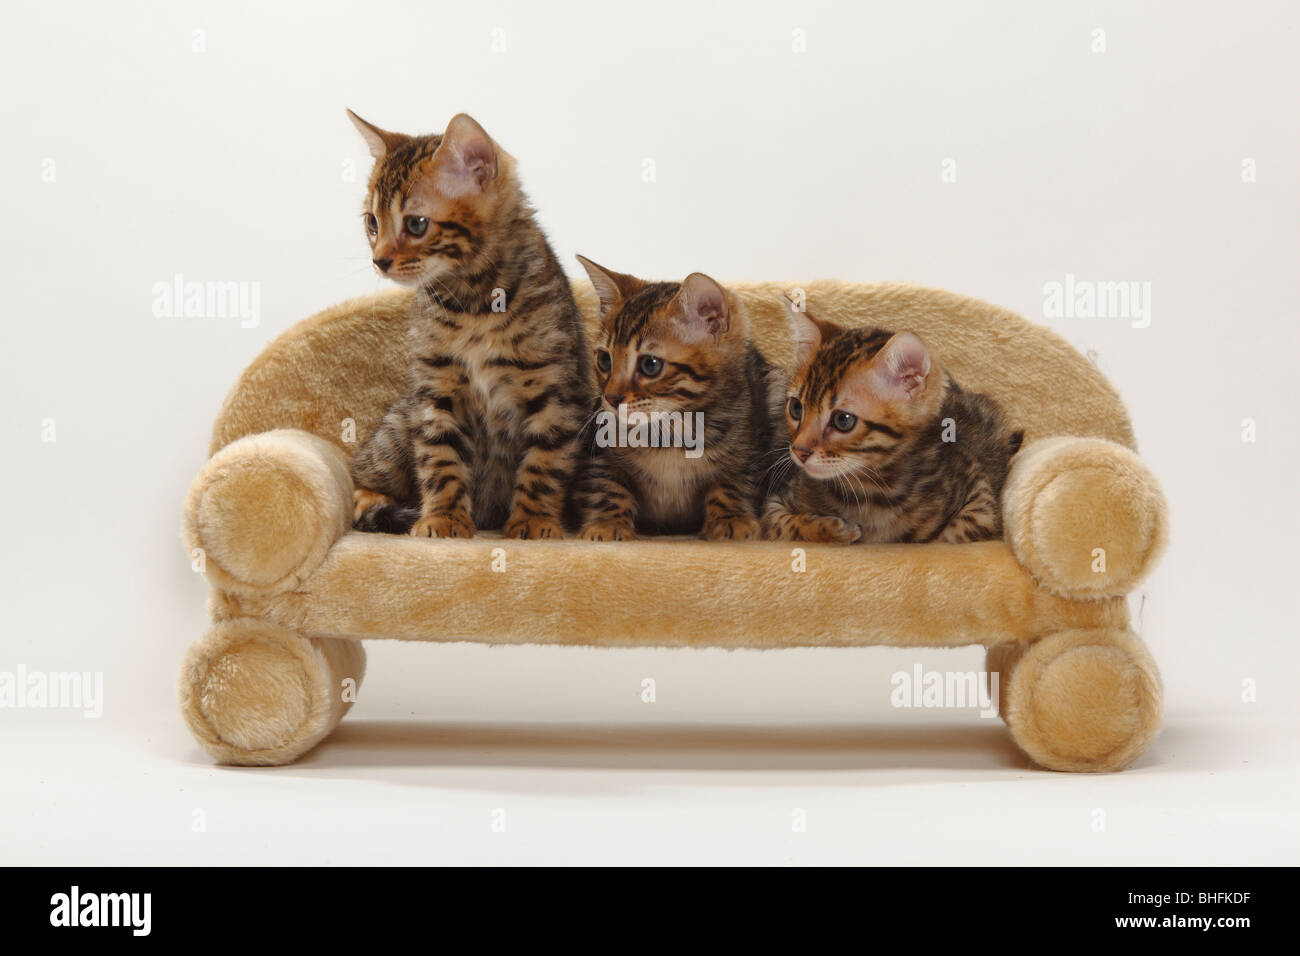 Les chats, chatons Bengal, 8 semaines Banque D'Images